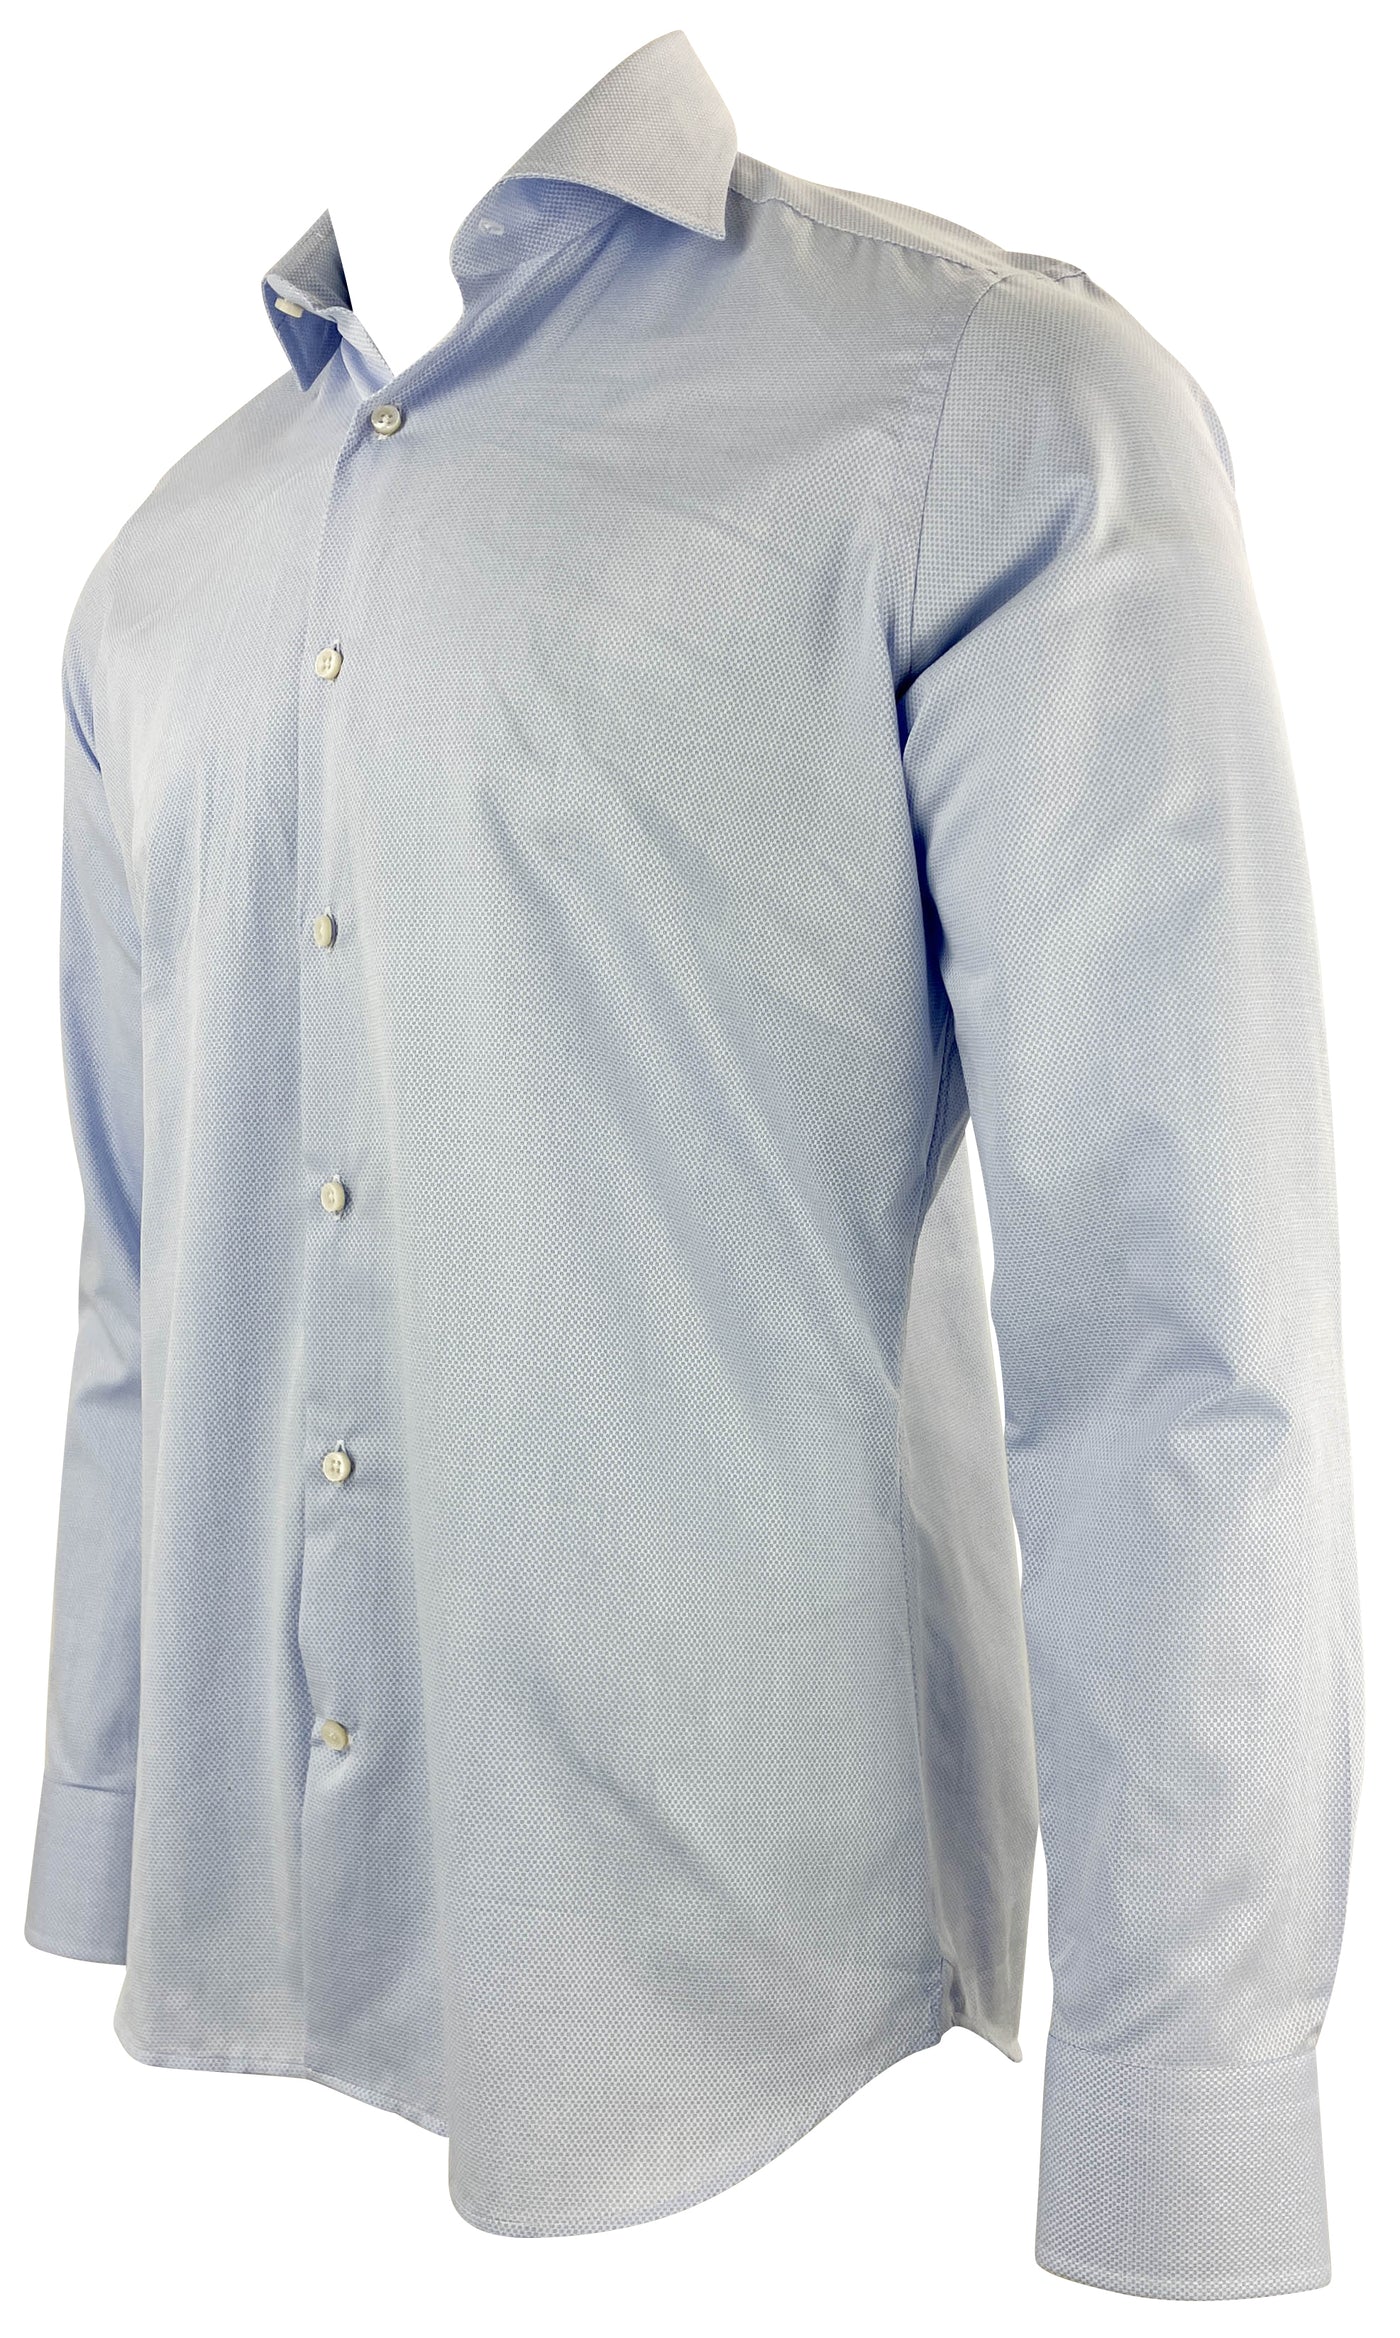 ORDEAN Button Down in Pale Blue - Discounts on ORDEAN at UAL